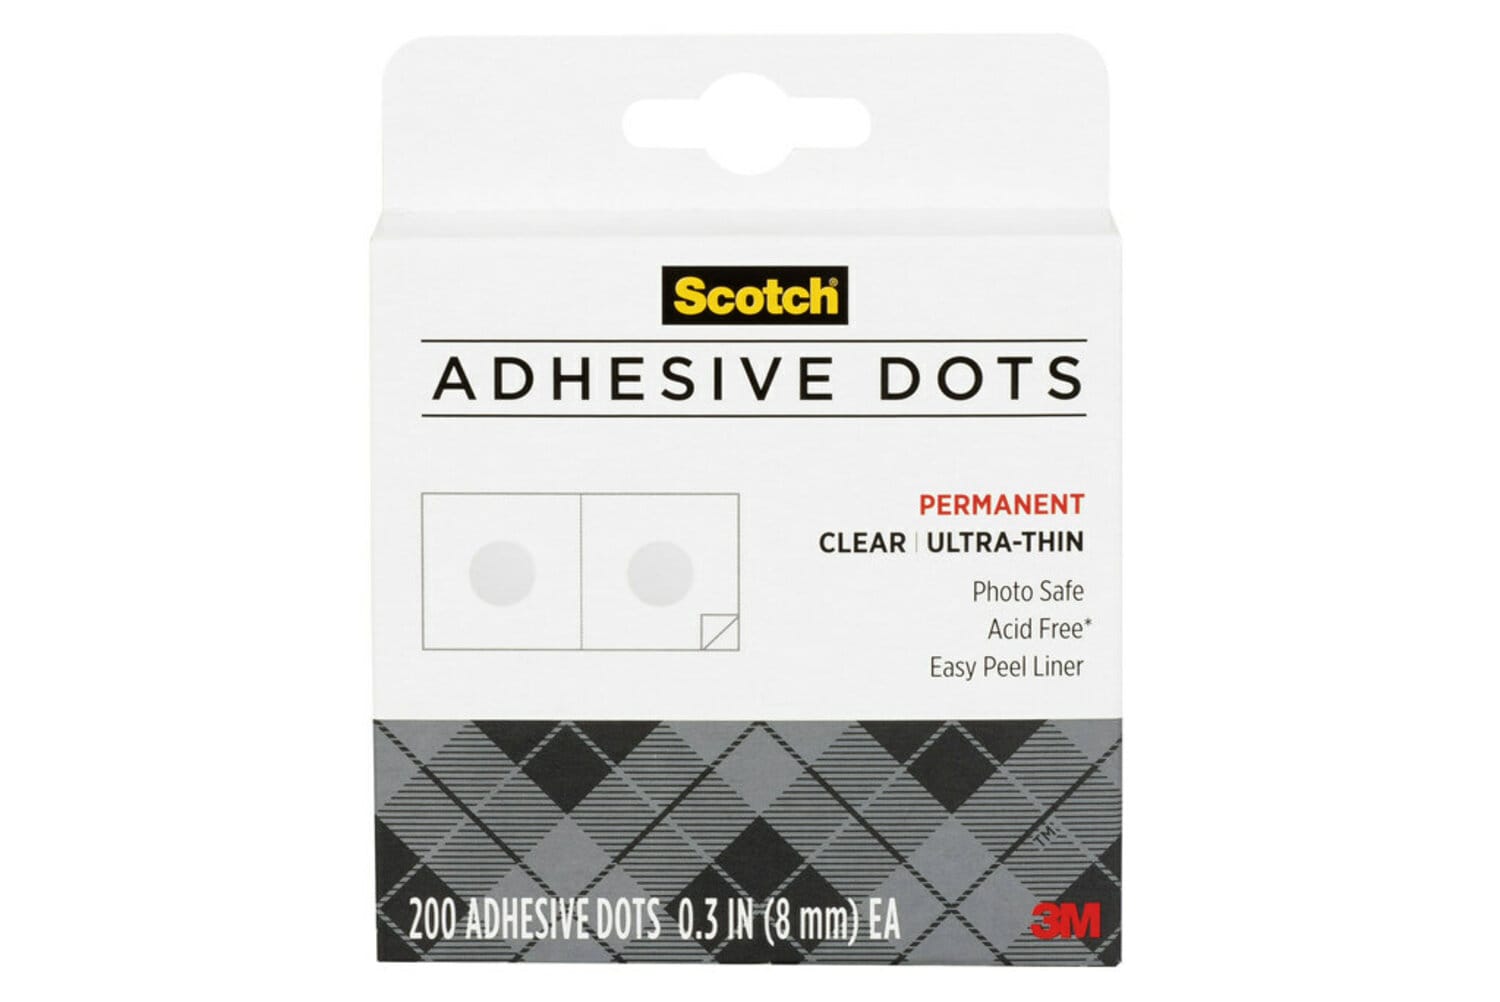 7010333105 - Scotch Adhesive Dots 010-200UT-CFT, Clear